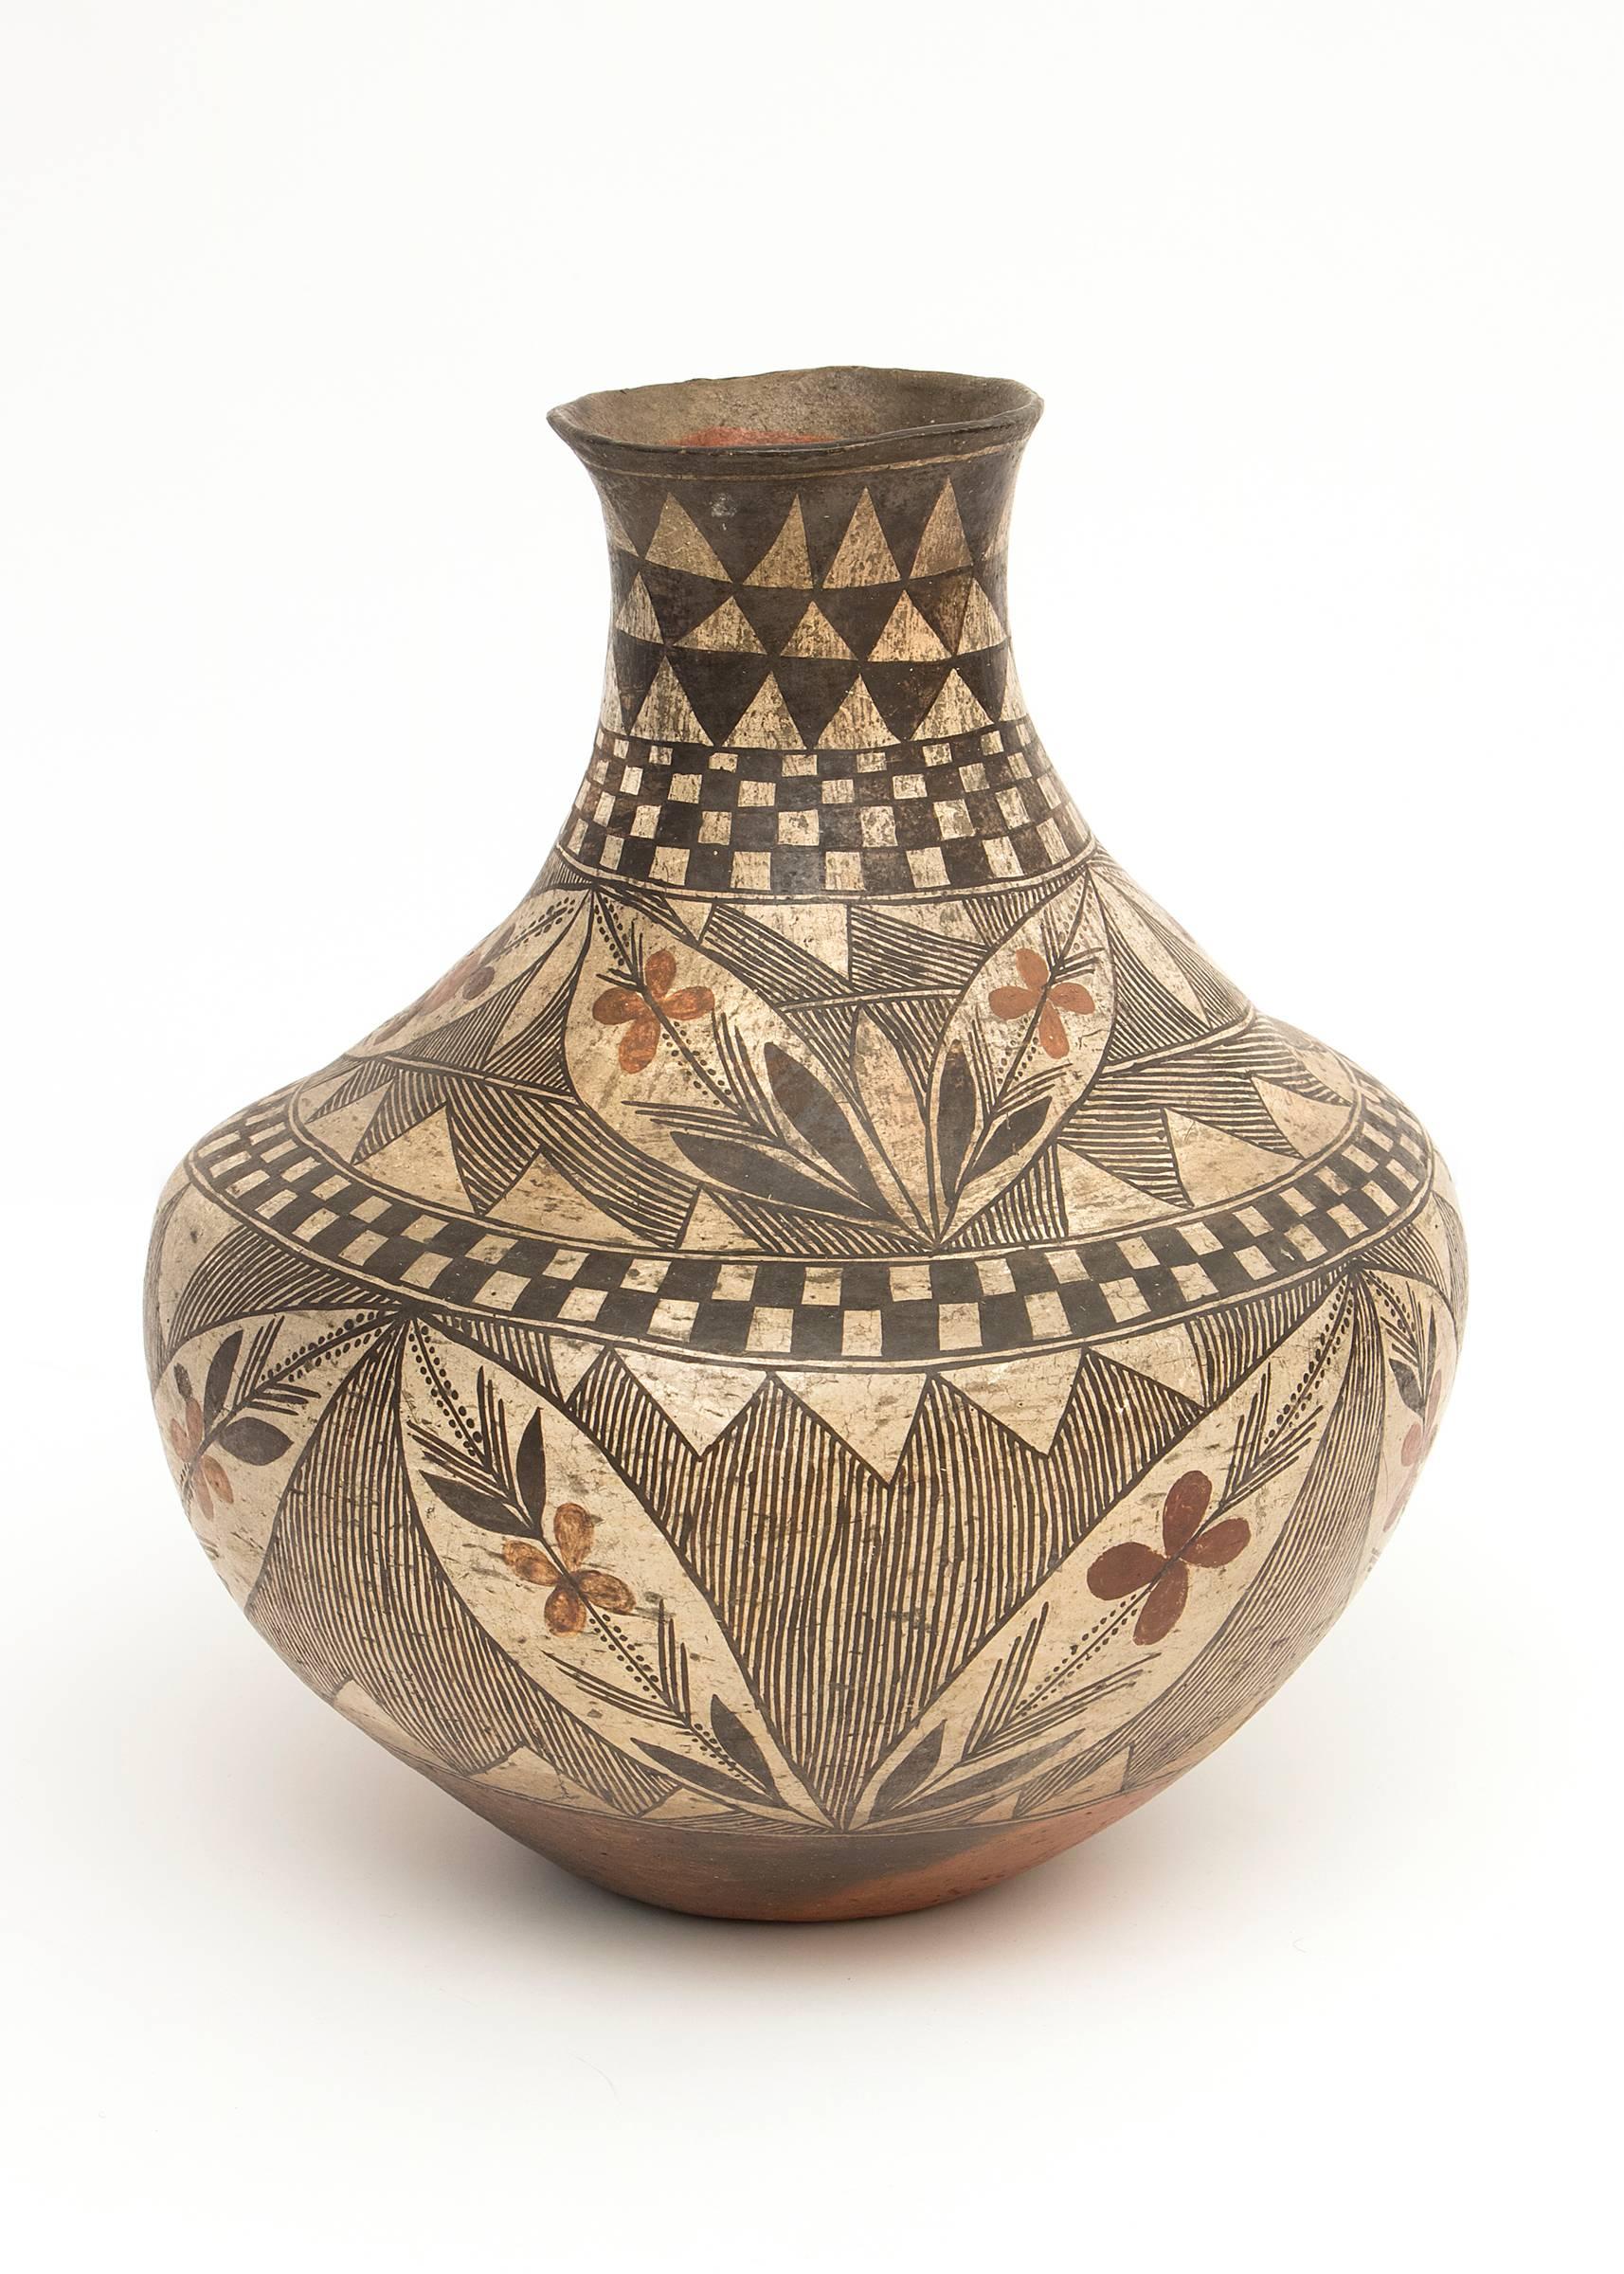 A rare antique Isleta Pueblo four-color earthenware jar constructed by hand and finely painted in slip glazes with Classic Acoma elements including floriate motifs and checkerboard elements.

Acoma Pueblo is located in New Mexico approximately 60